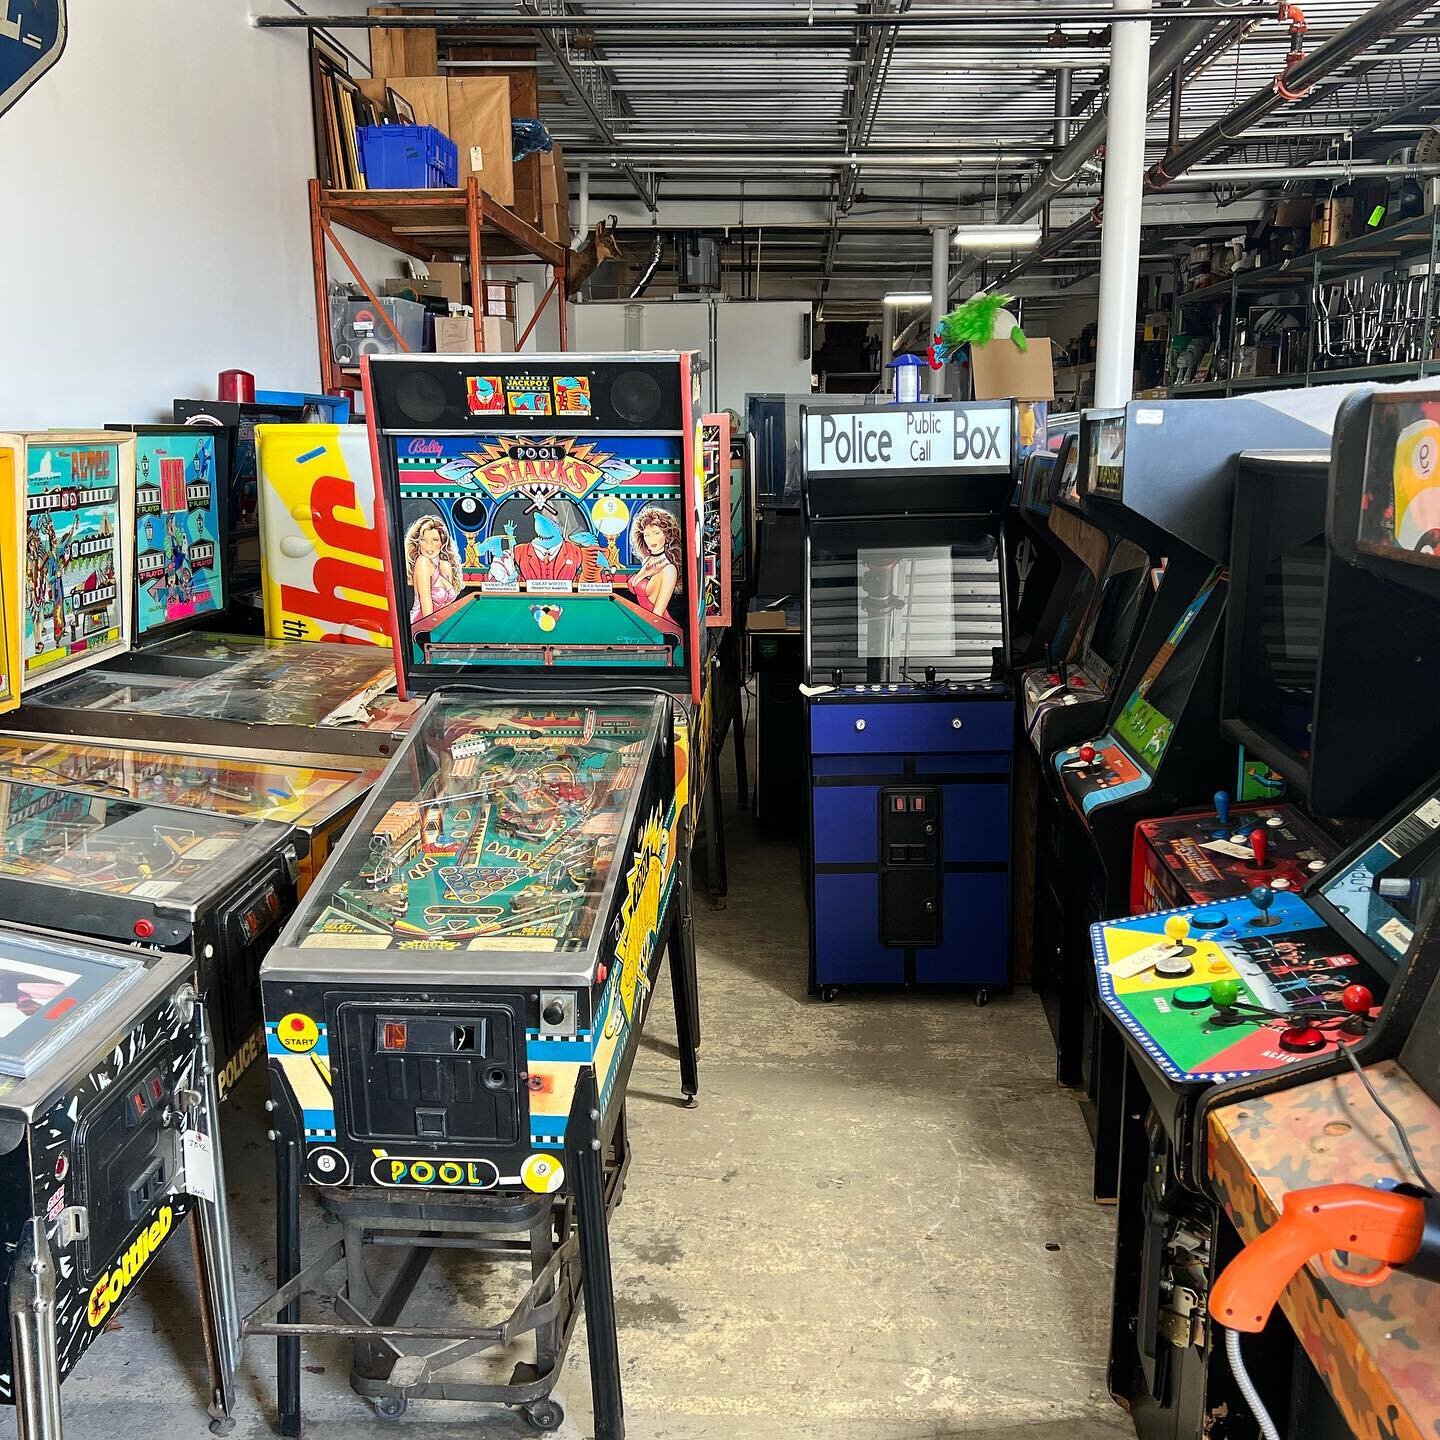 Who&rsquo;s excited for TONIGHT?!? 6pm ET - Live, online bidding begins for our March Gameroom &amp; Advertising Auction. Don&rsquo;t miss out -  link in bio to register and bid NOW 🤩
.
#arcadegames #vintageadvertisingsigns #pinballmachines #jukebox